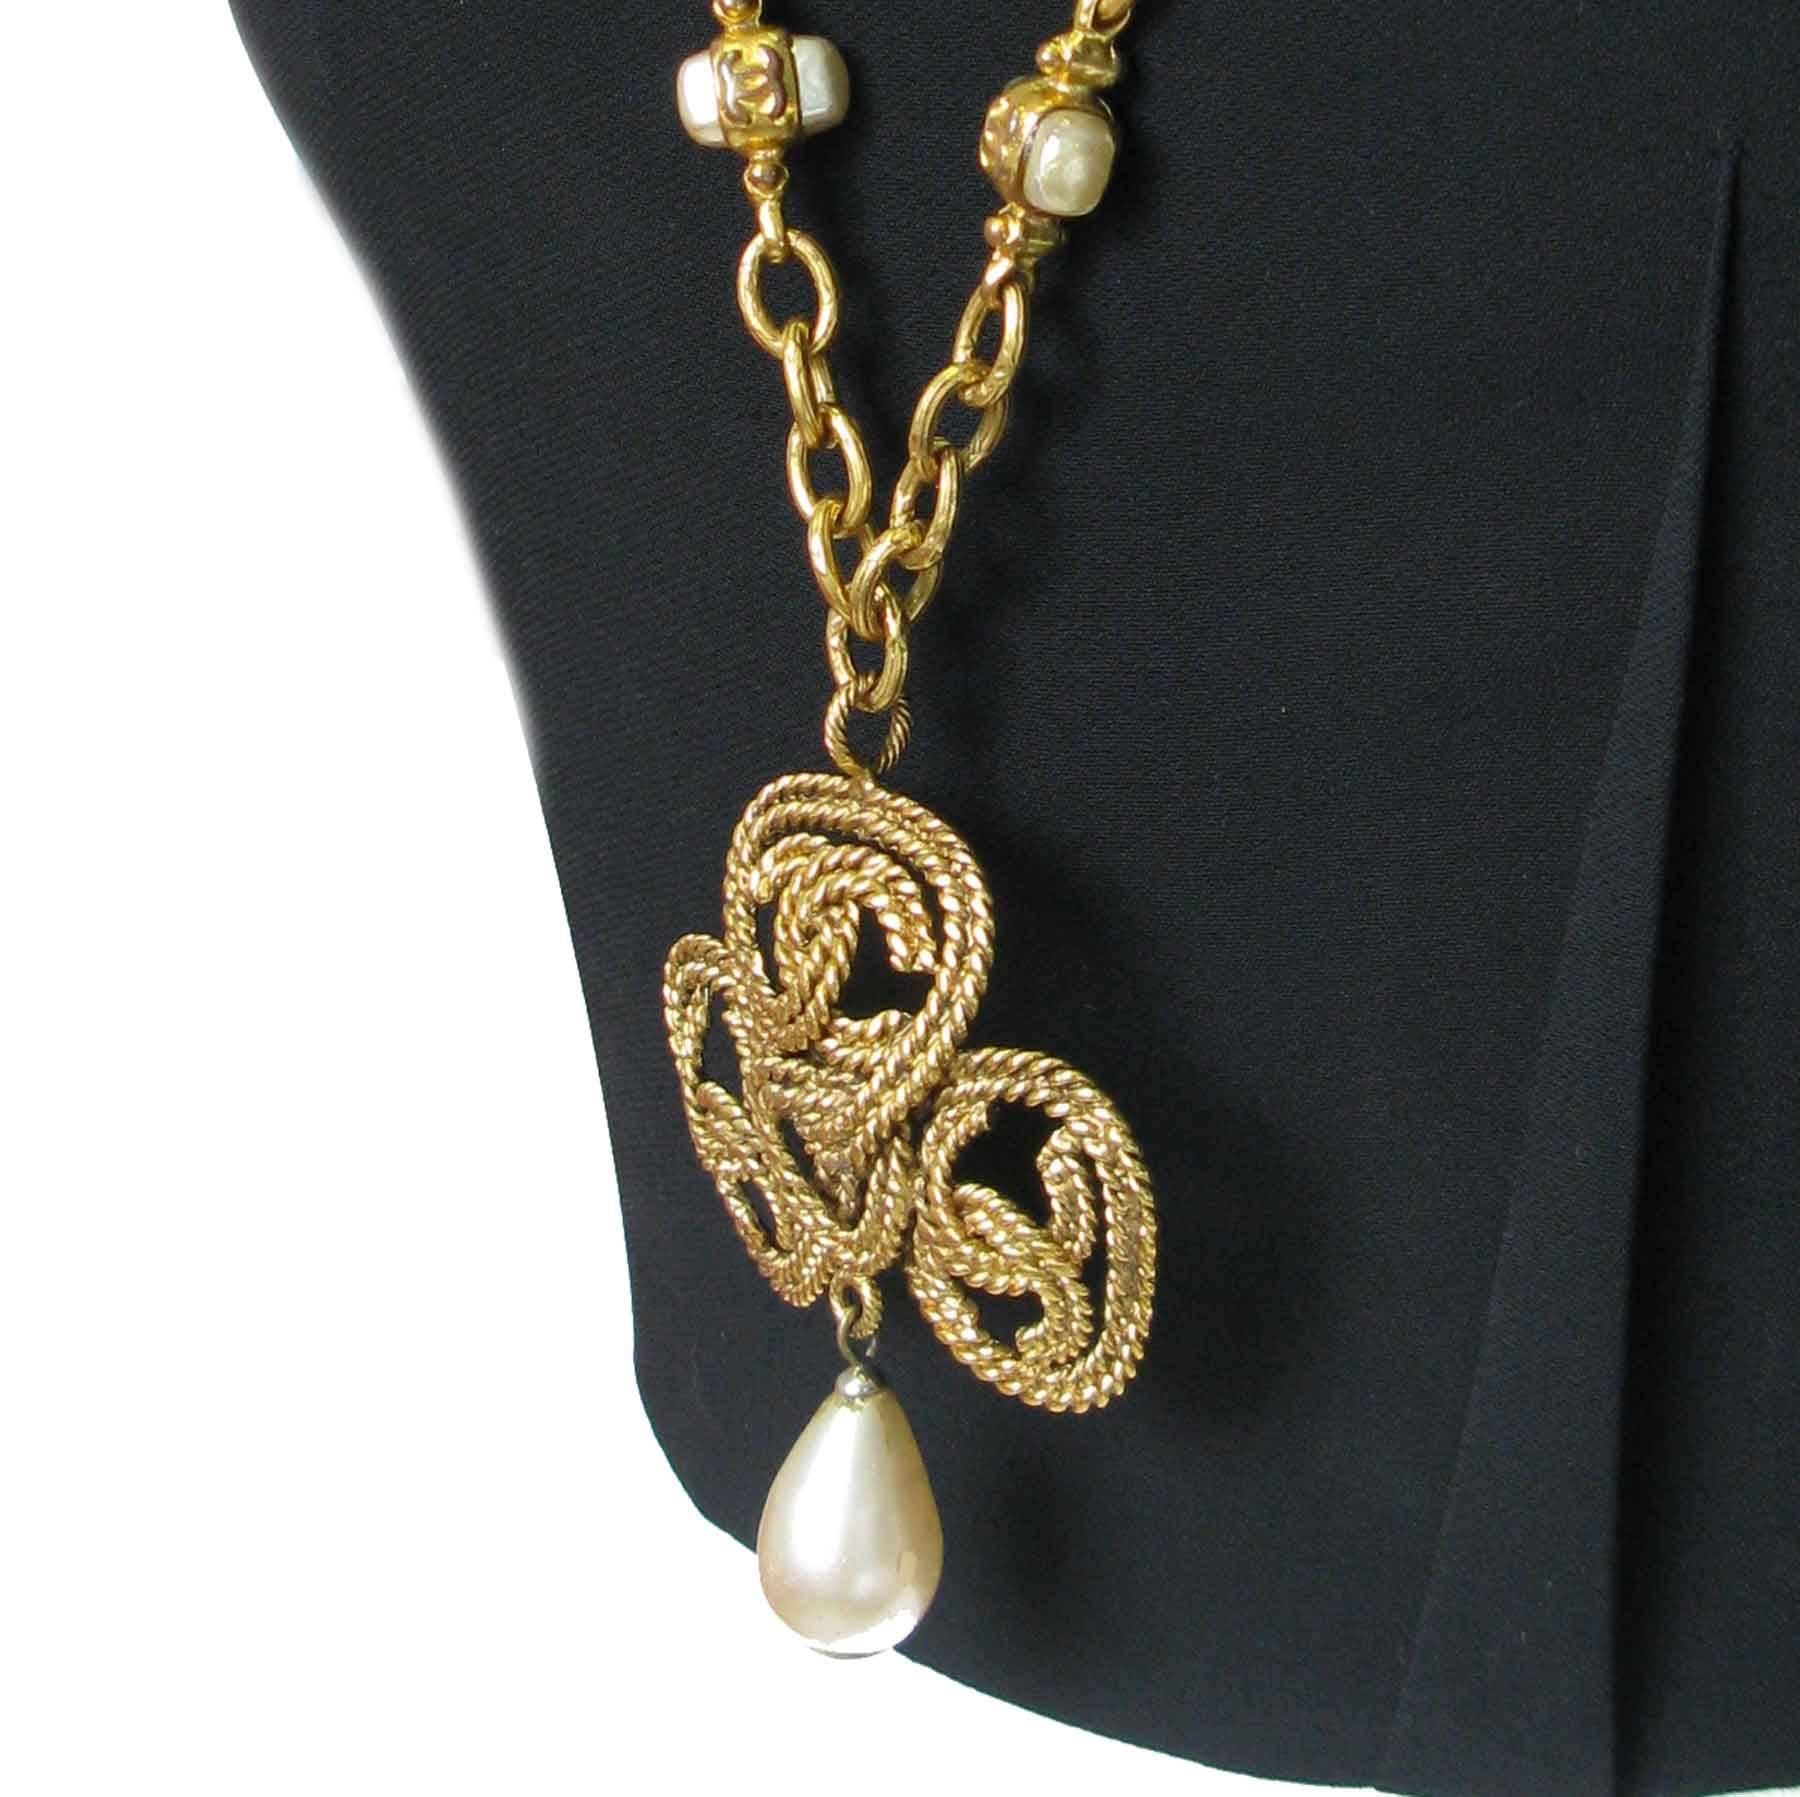 Vintage Chanel Necklace with Gold and Pearls 5